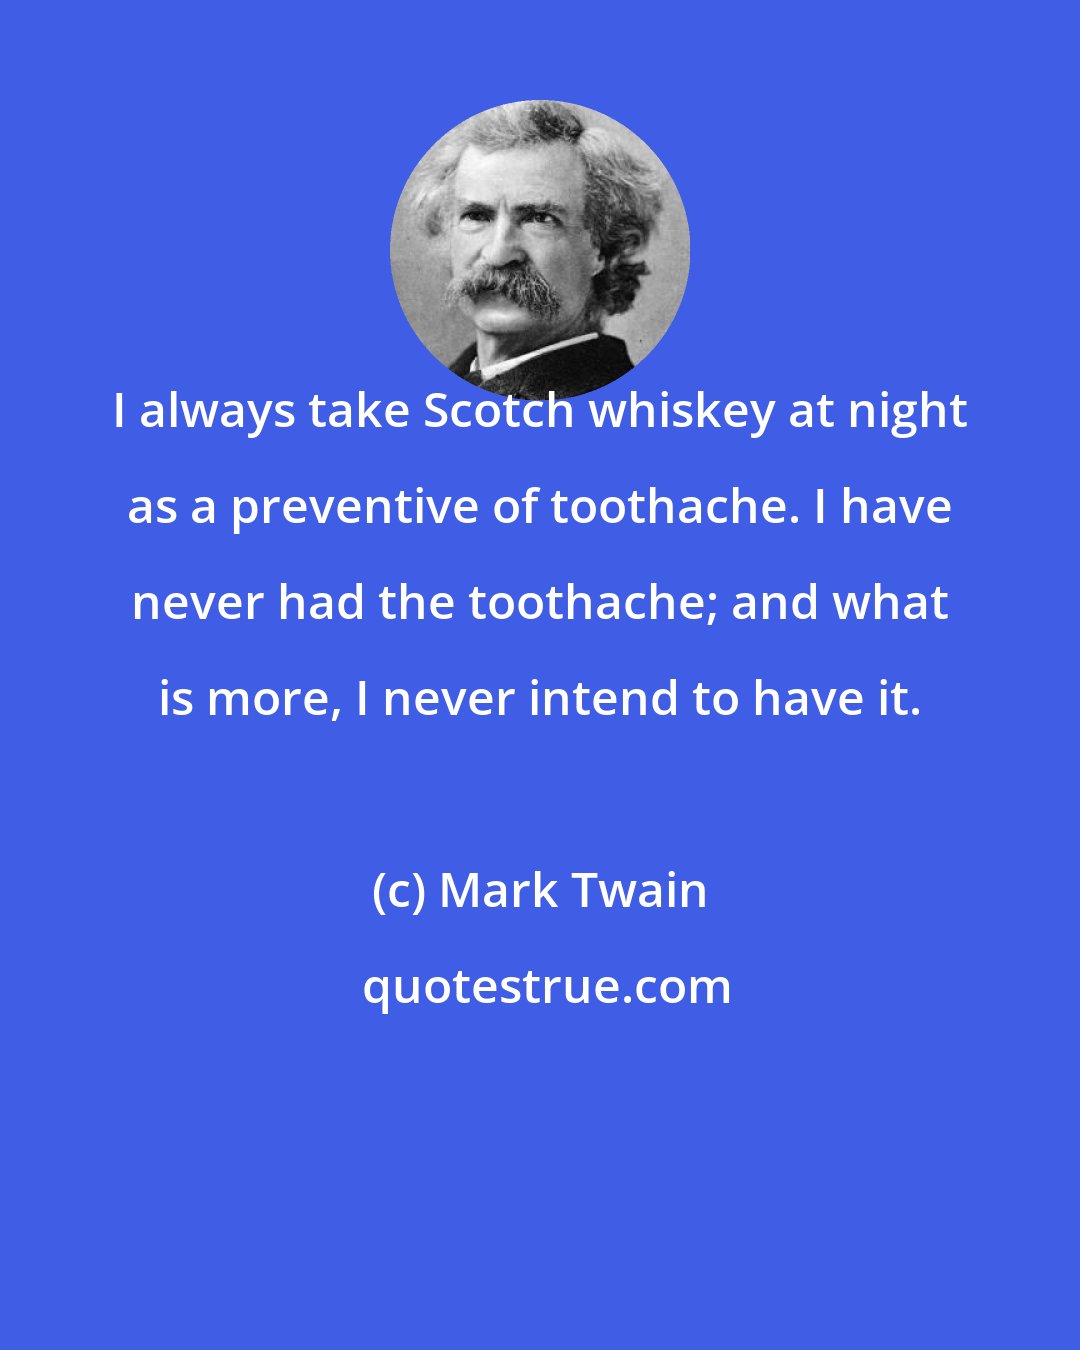 Mark Twain: I always take Scotch whiskey at night as a preventive of toothache. I have never had the toothache; and what is more, I never intend to have it.